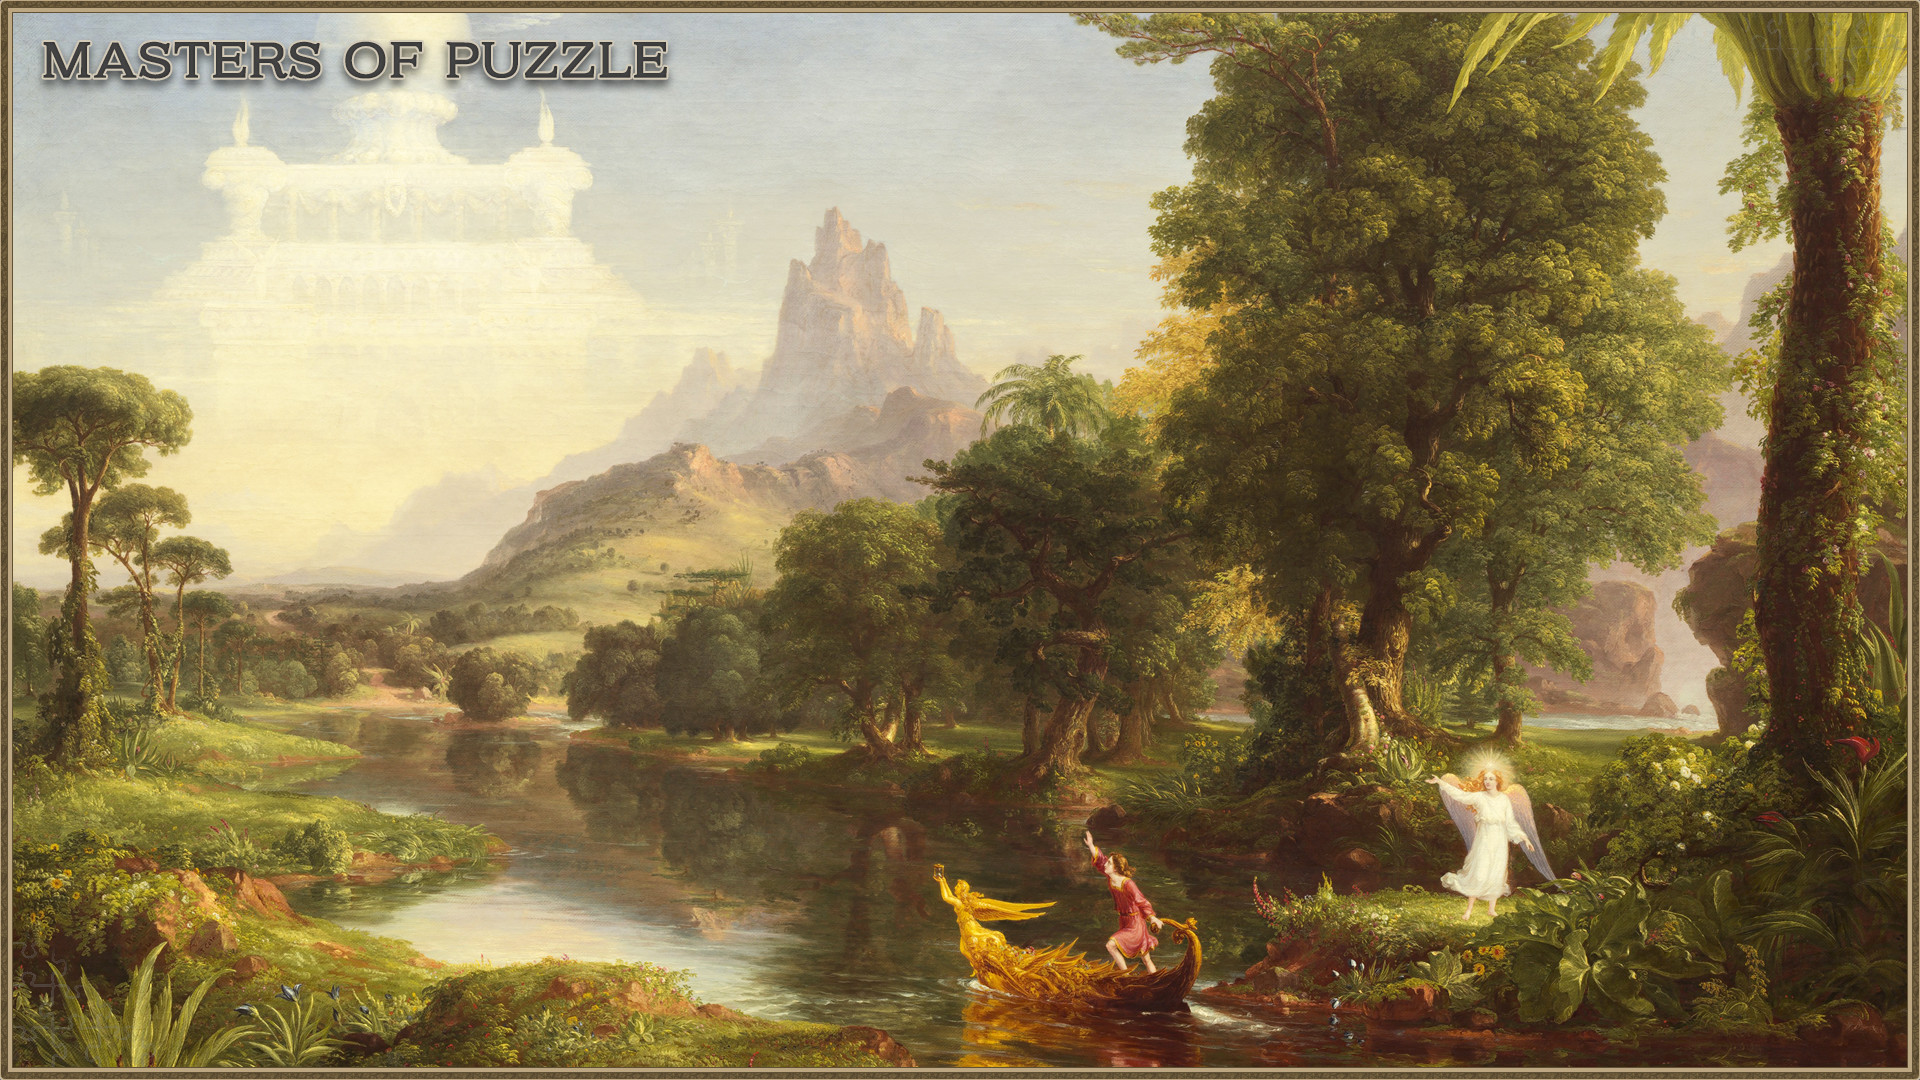 Masters of Puzzle - Youth by Thomas Cole Featured Screenshot #1